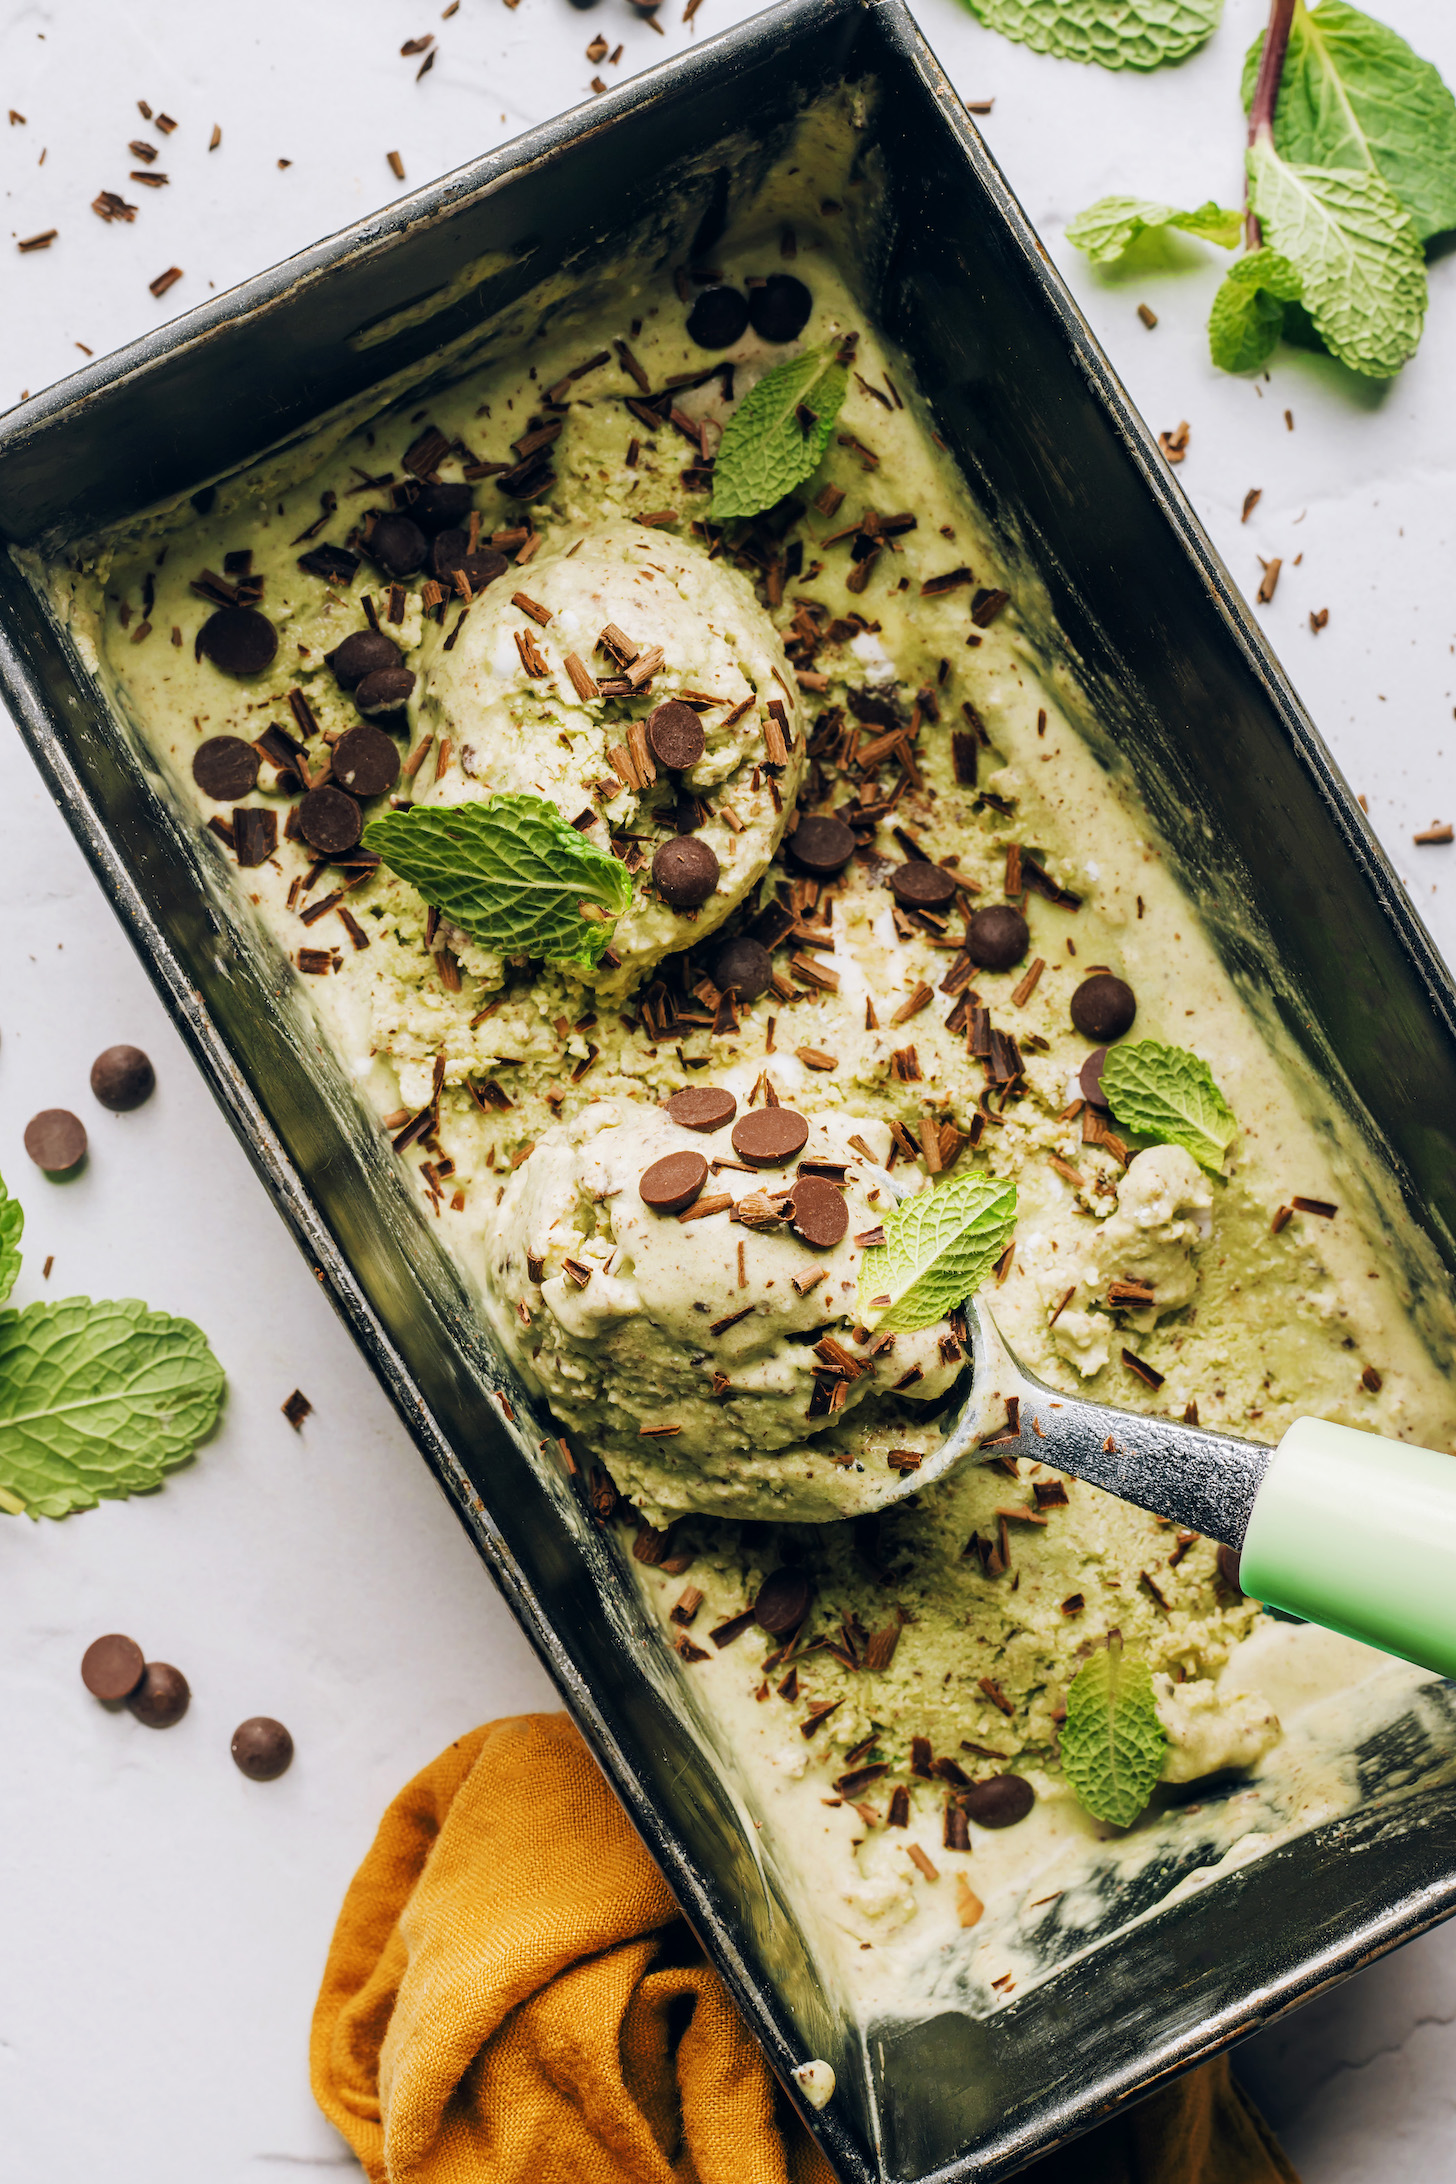 Vegan mint chocolate ice cream being scooped with an ice cream scoop 